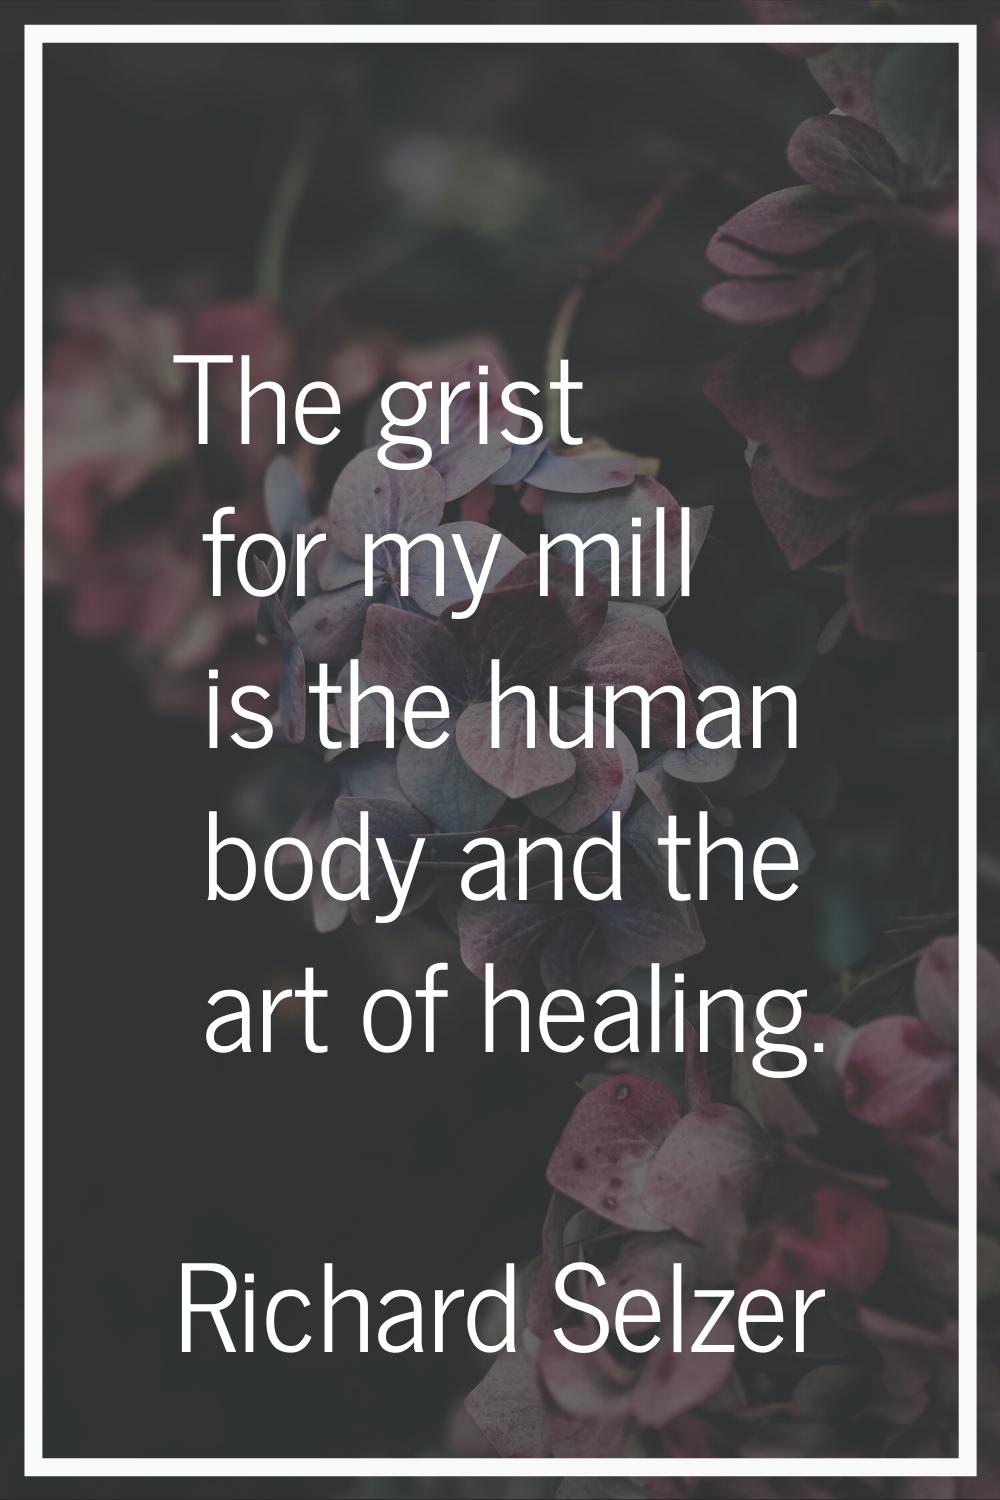 The grist for my mill is the human body and the art of healing.